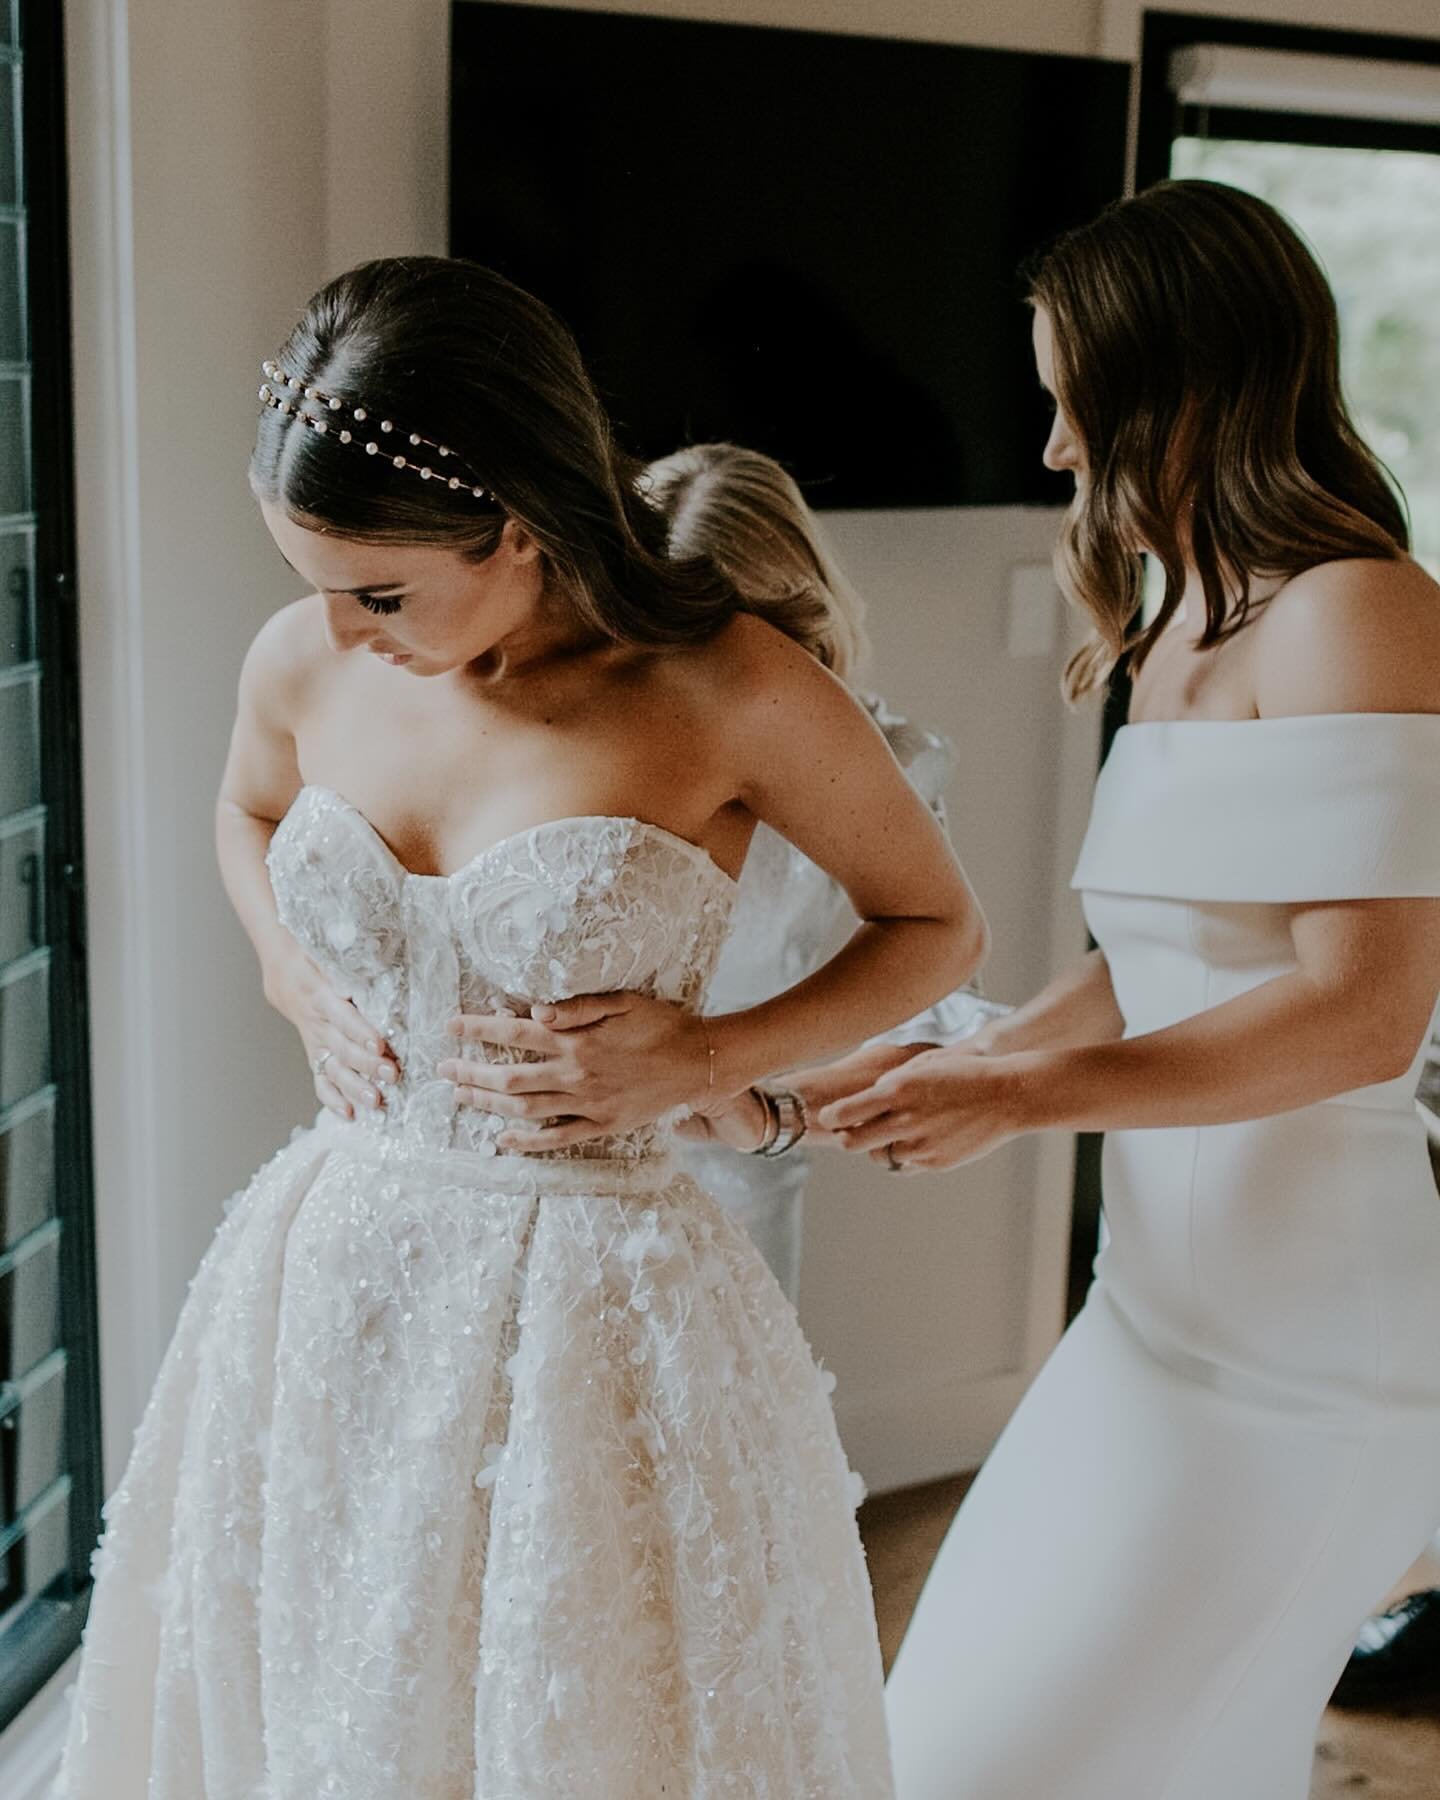 &ldquo;Words will not do justice trying to explain how magical it was when I first saw the dress in its final product.... it was absolute perfection. I felt supported, confident and happy which is exactly how I was hoping to feel for my special day. 